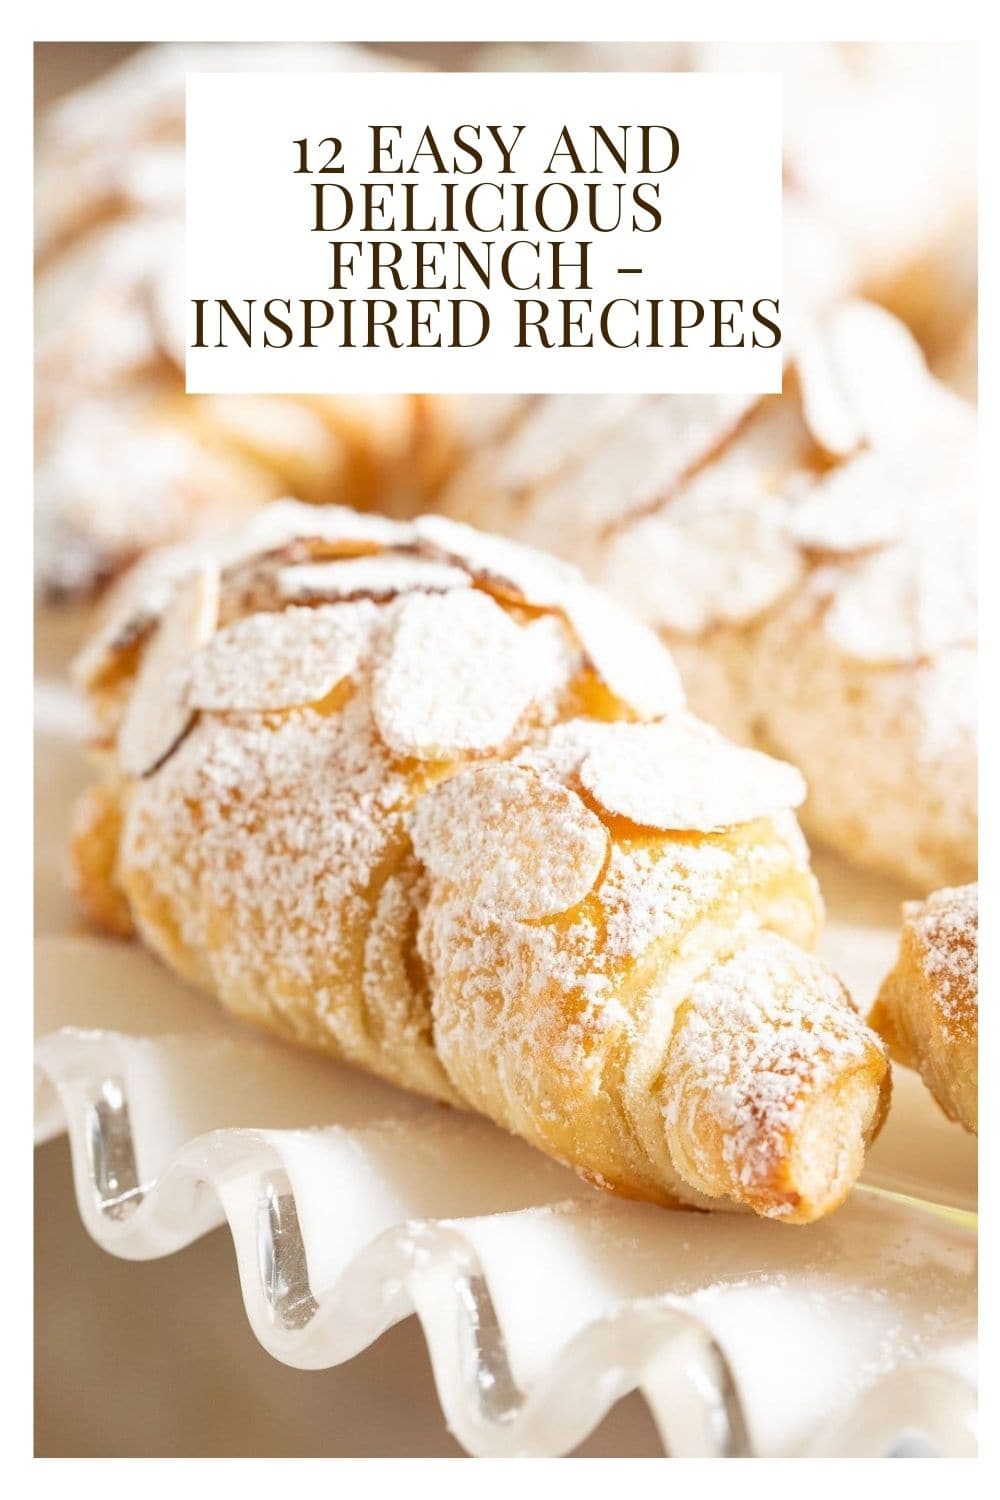 Take a Trip to France! 12 Easy French Inspired Recipes